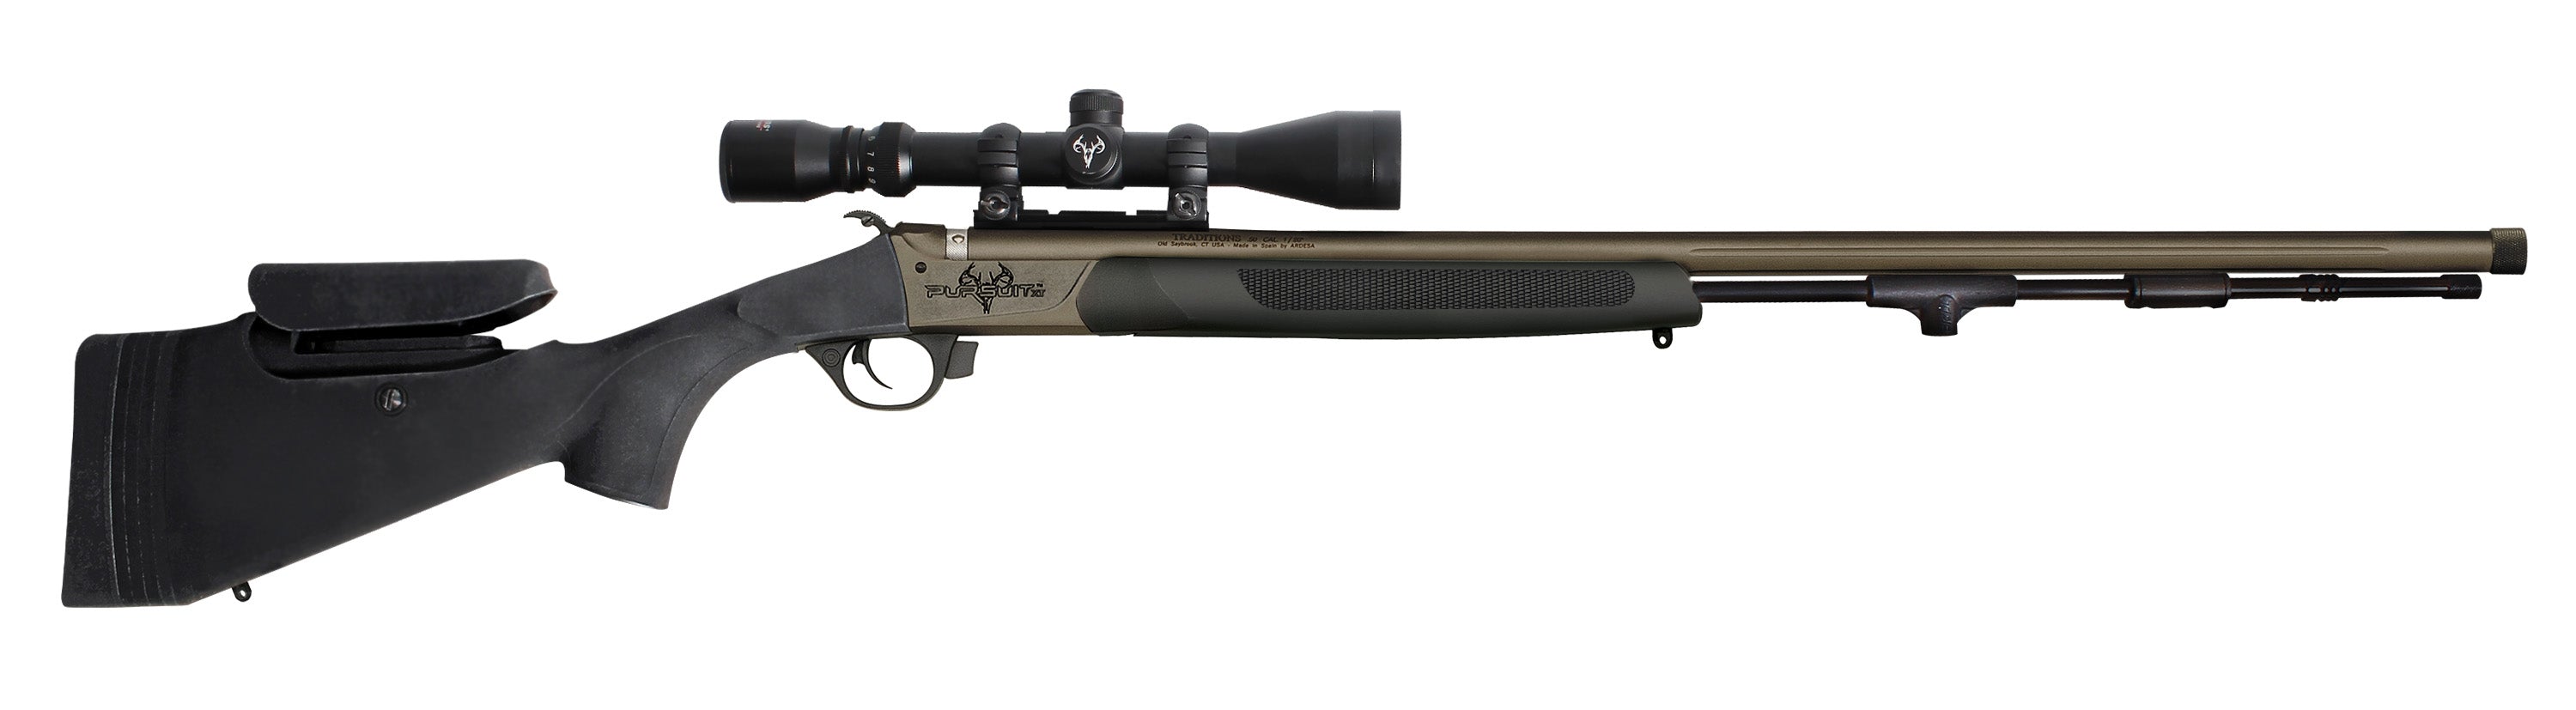 Traditions Pursuit XT Pro - Black Stock with Scope